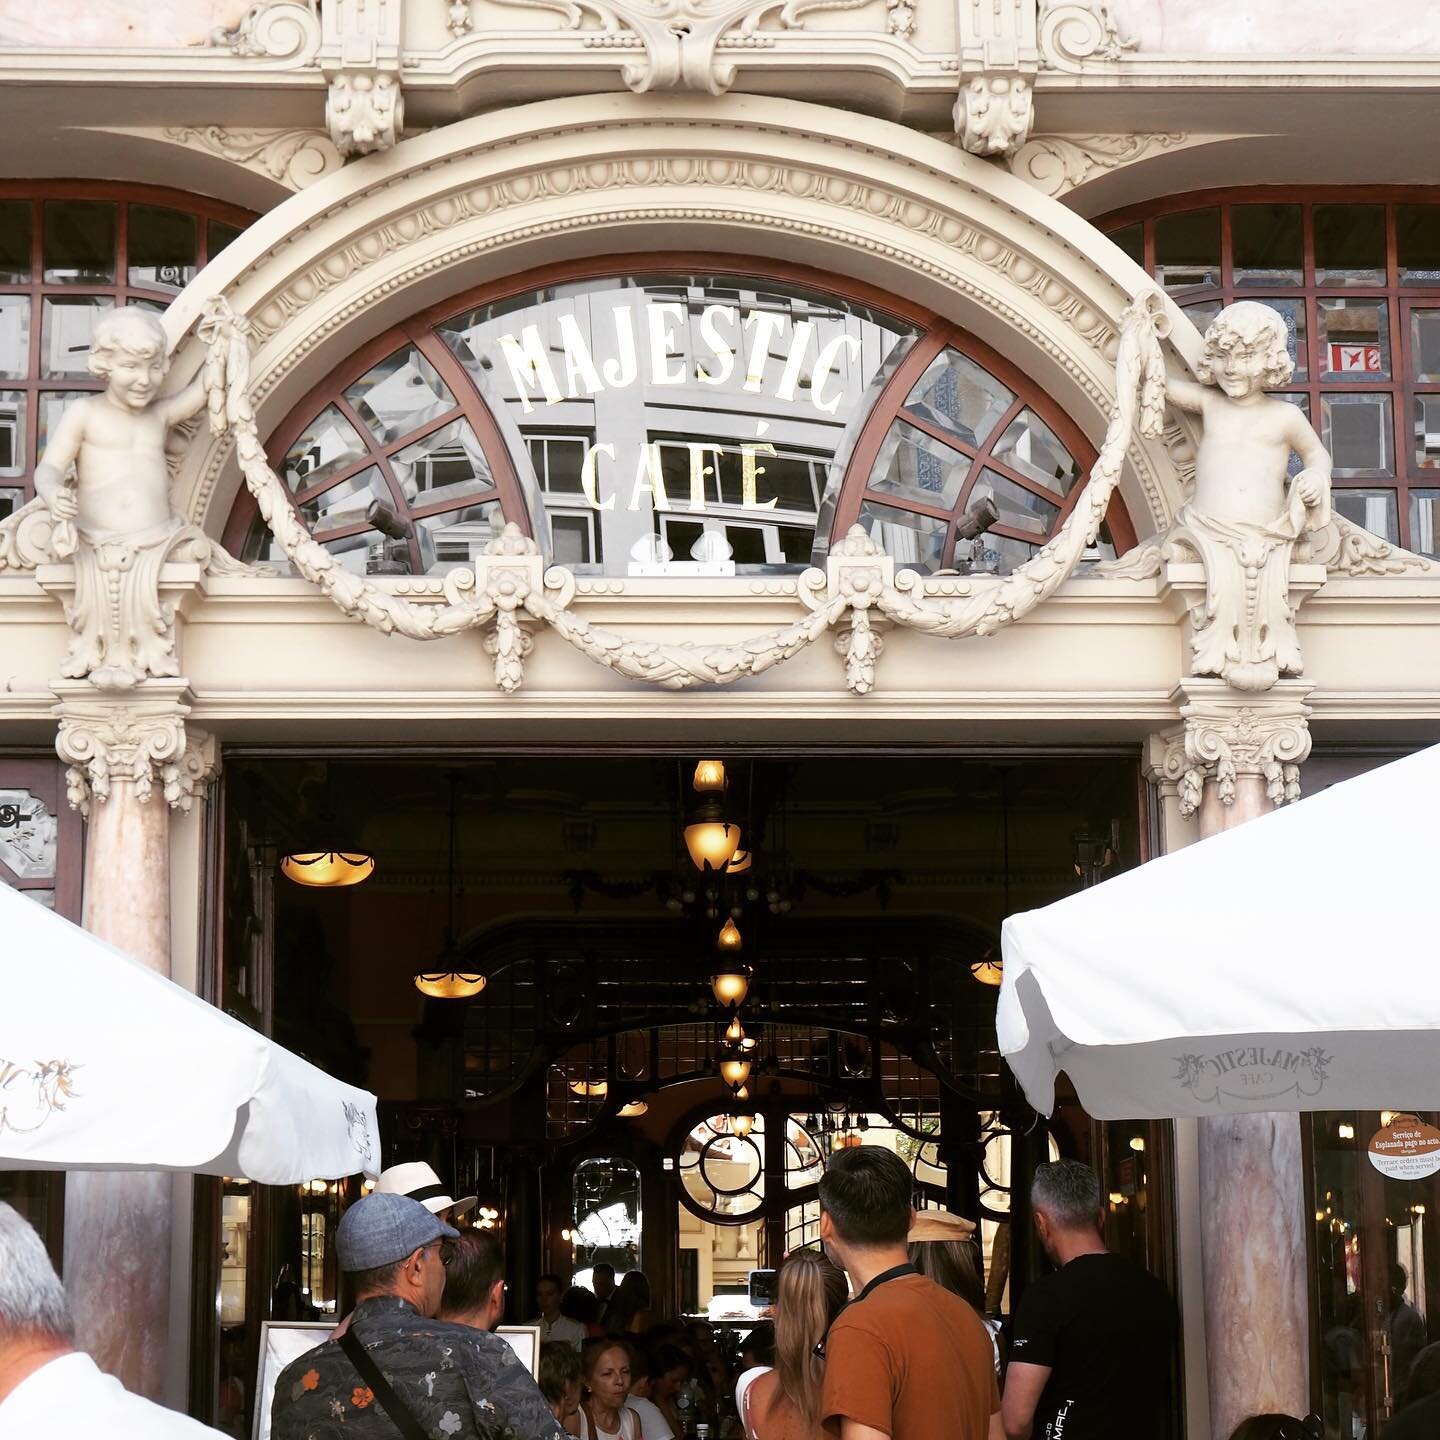 One of the most beautiful cafes in Europe. What an inspirational joy to be at the #majestic_cafe Porto in all its Art Nouveau splendour. What a beautiful place to drink wonderful coffee.
.
.
#cafesociety #myinsiration #hollybobs #portugal #jewelleryd